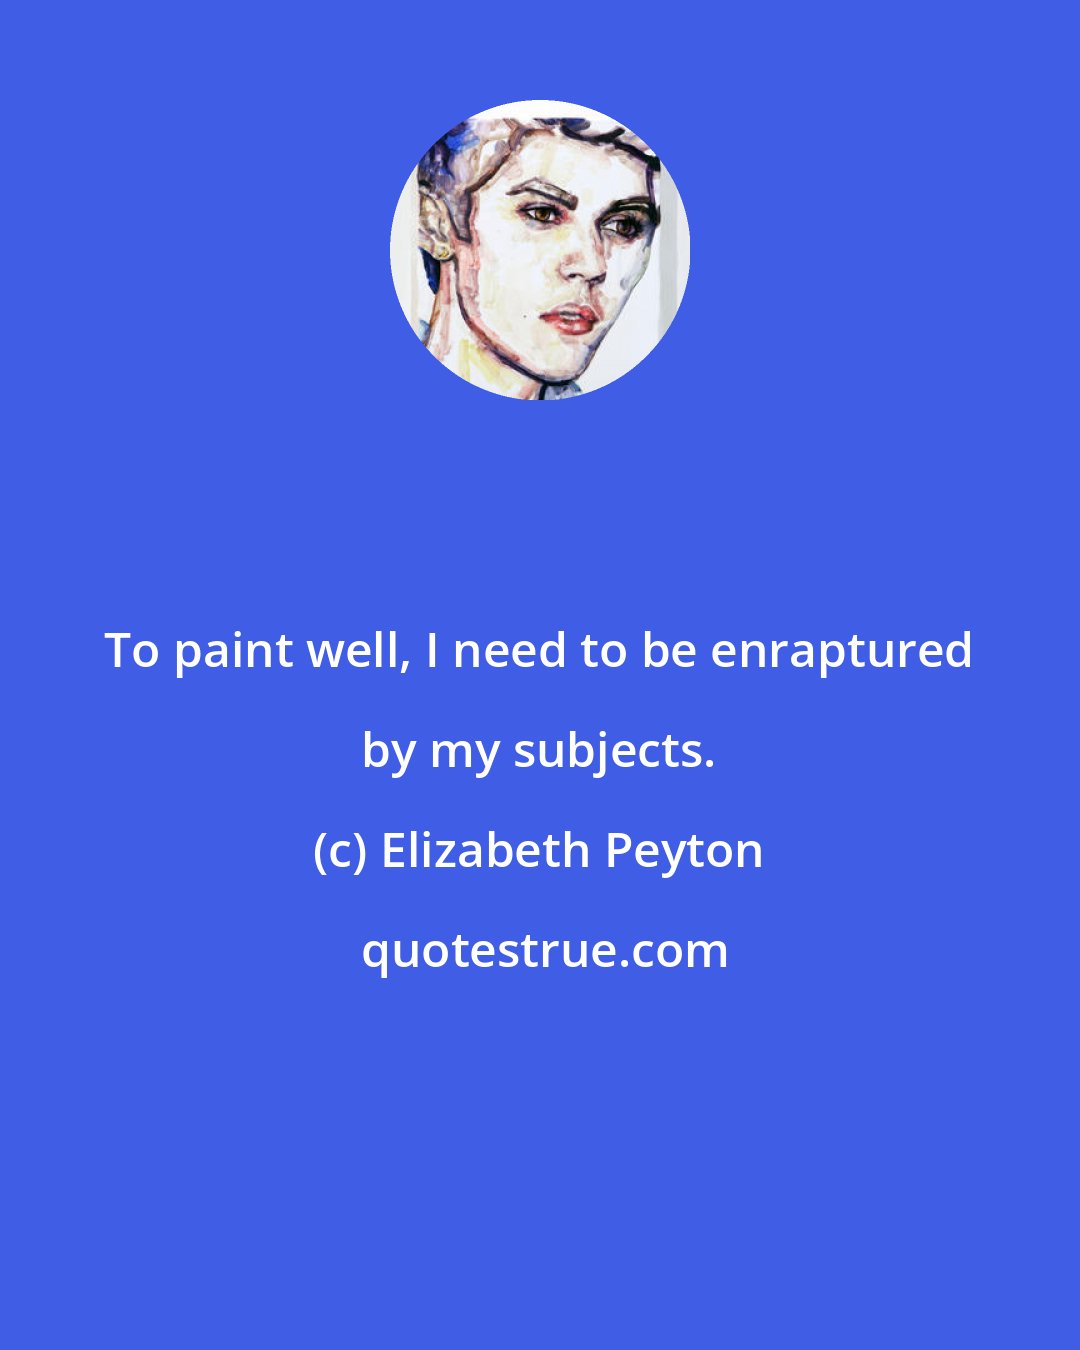 Elizabeth Peyton: To paint well, I need to be enraptured by my subjects.